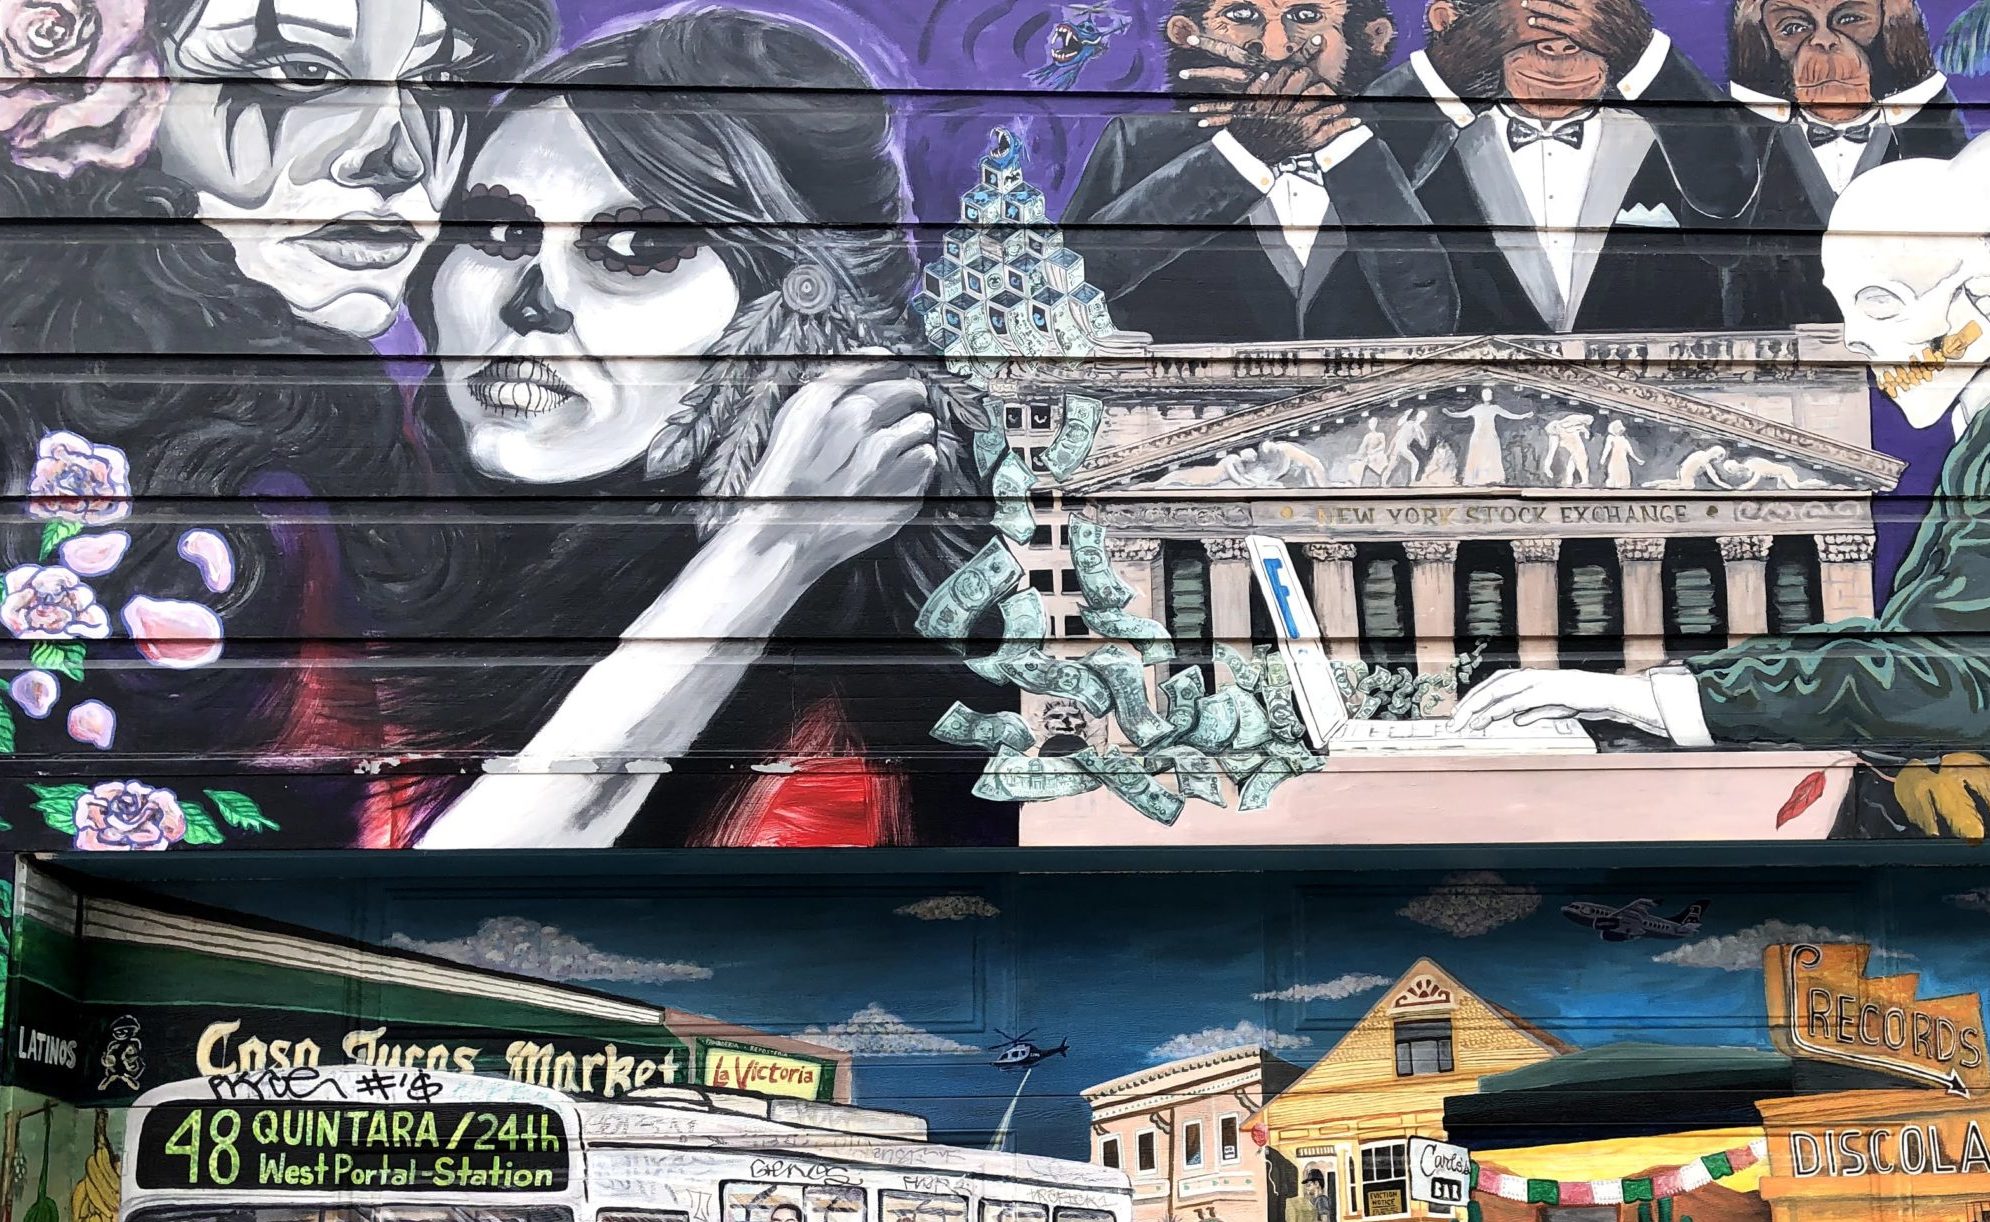 Mission District murals with Latino influence